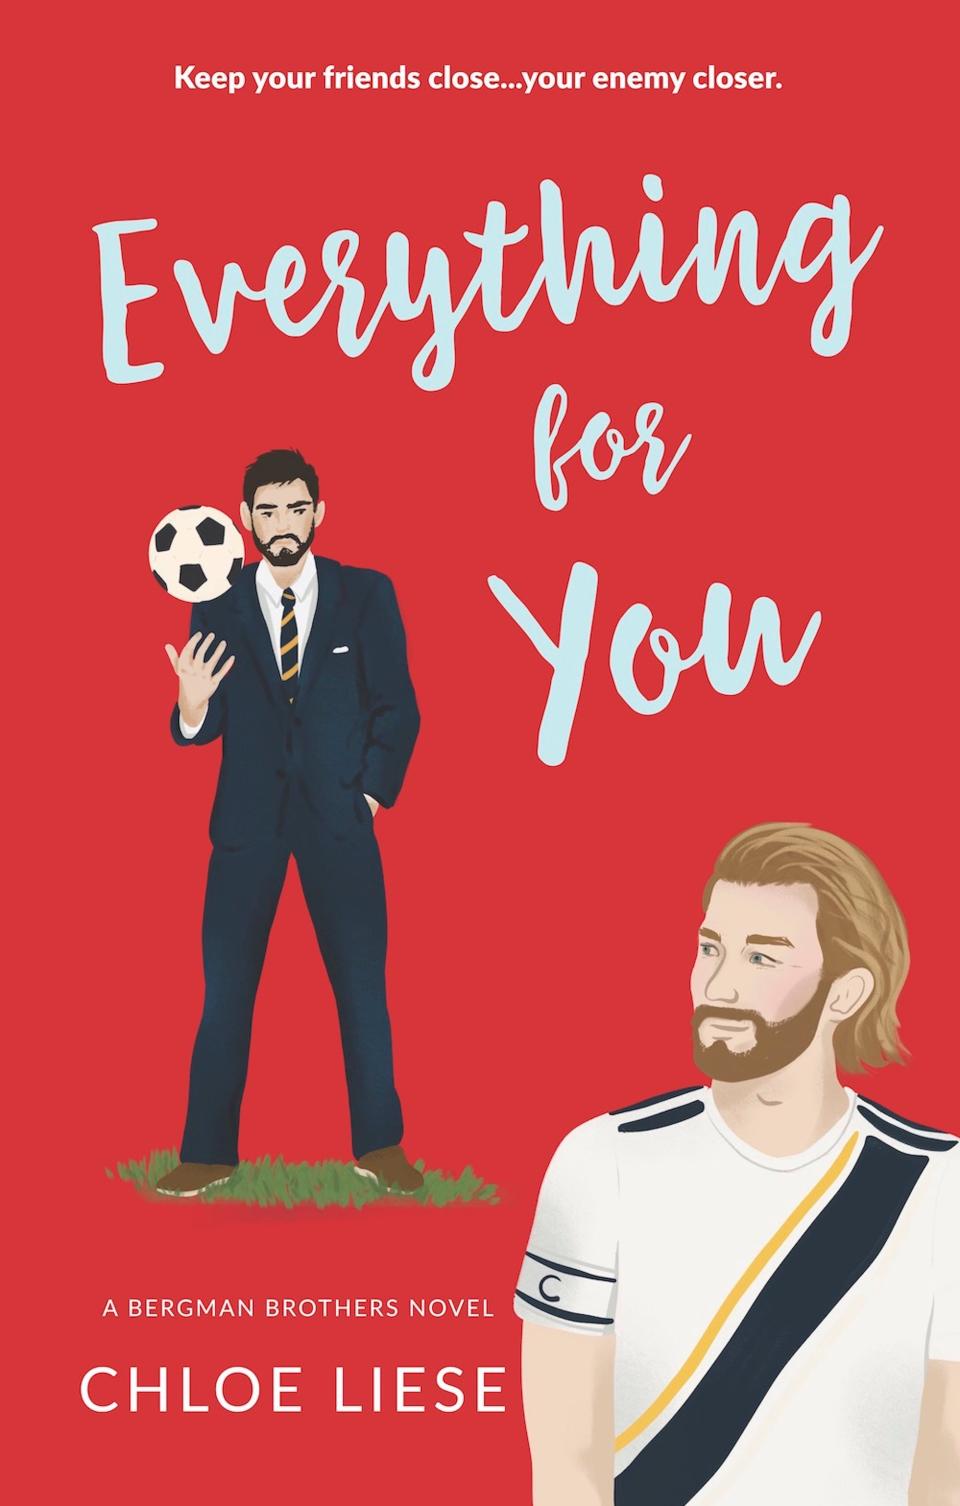 "Everything for You" by Chloe Liese